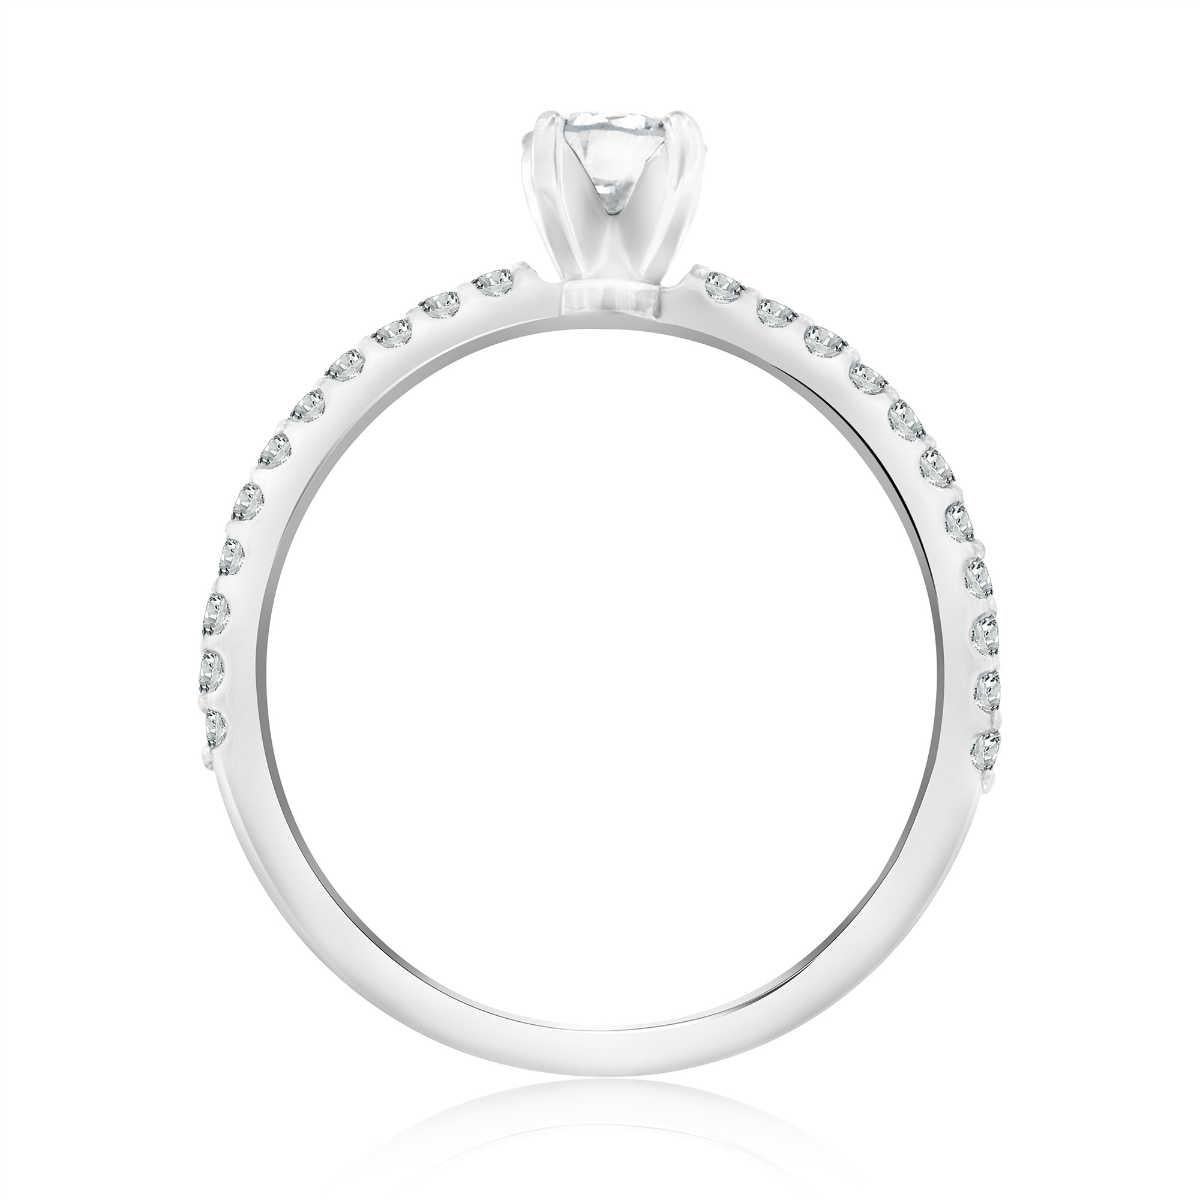 This petite engagement ring features one center round diamond, 0.37 carat. The diamond is F in color and SI2 in clarity. There are 22 round brilliant diamonds micro-prong set along the shank in a total of 0.22 Carat. Experience the difference in